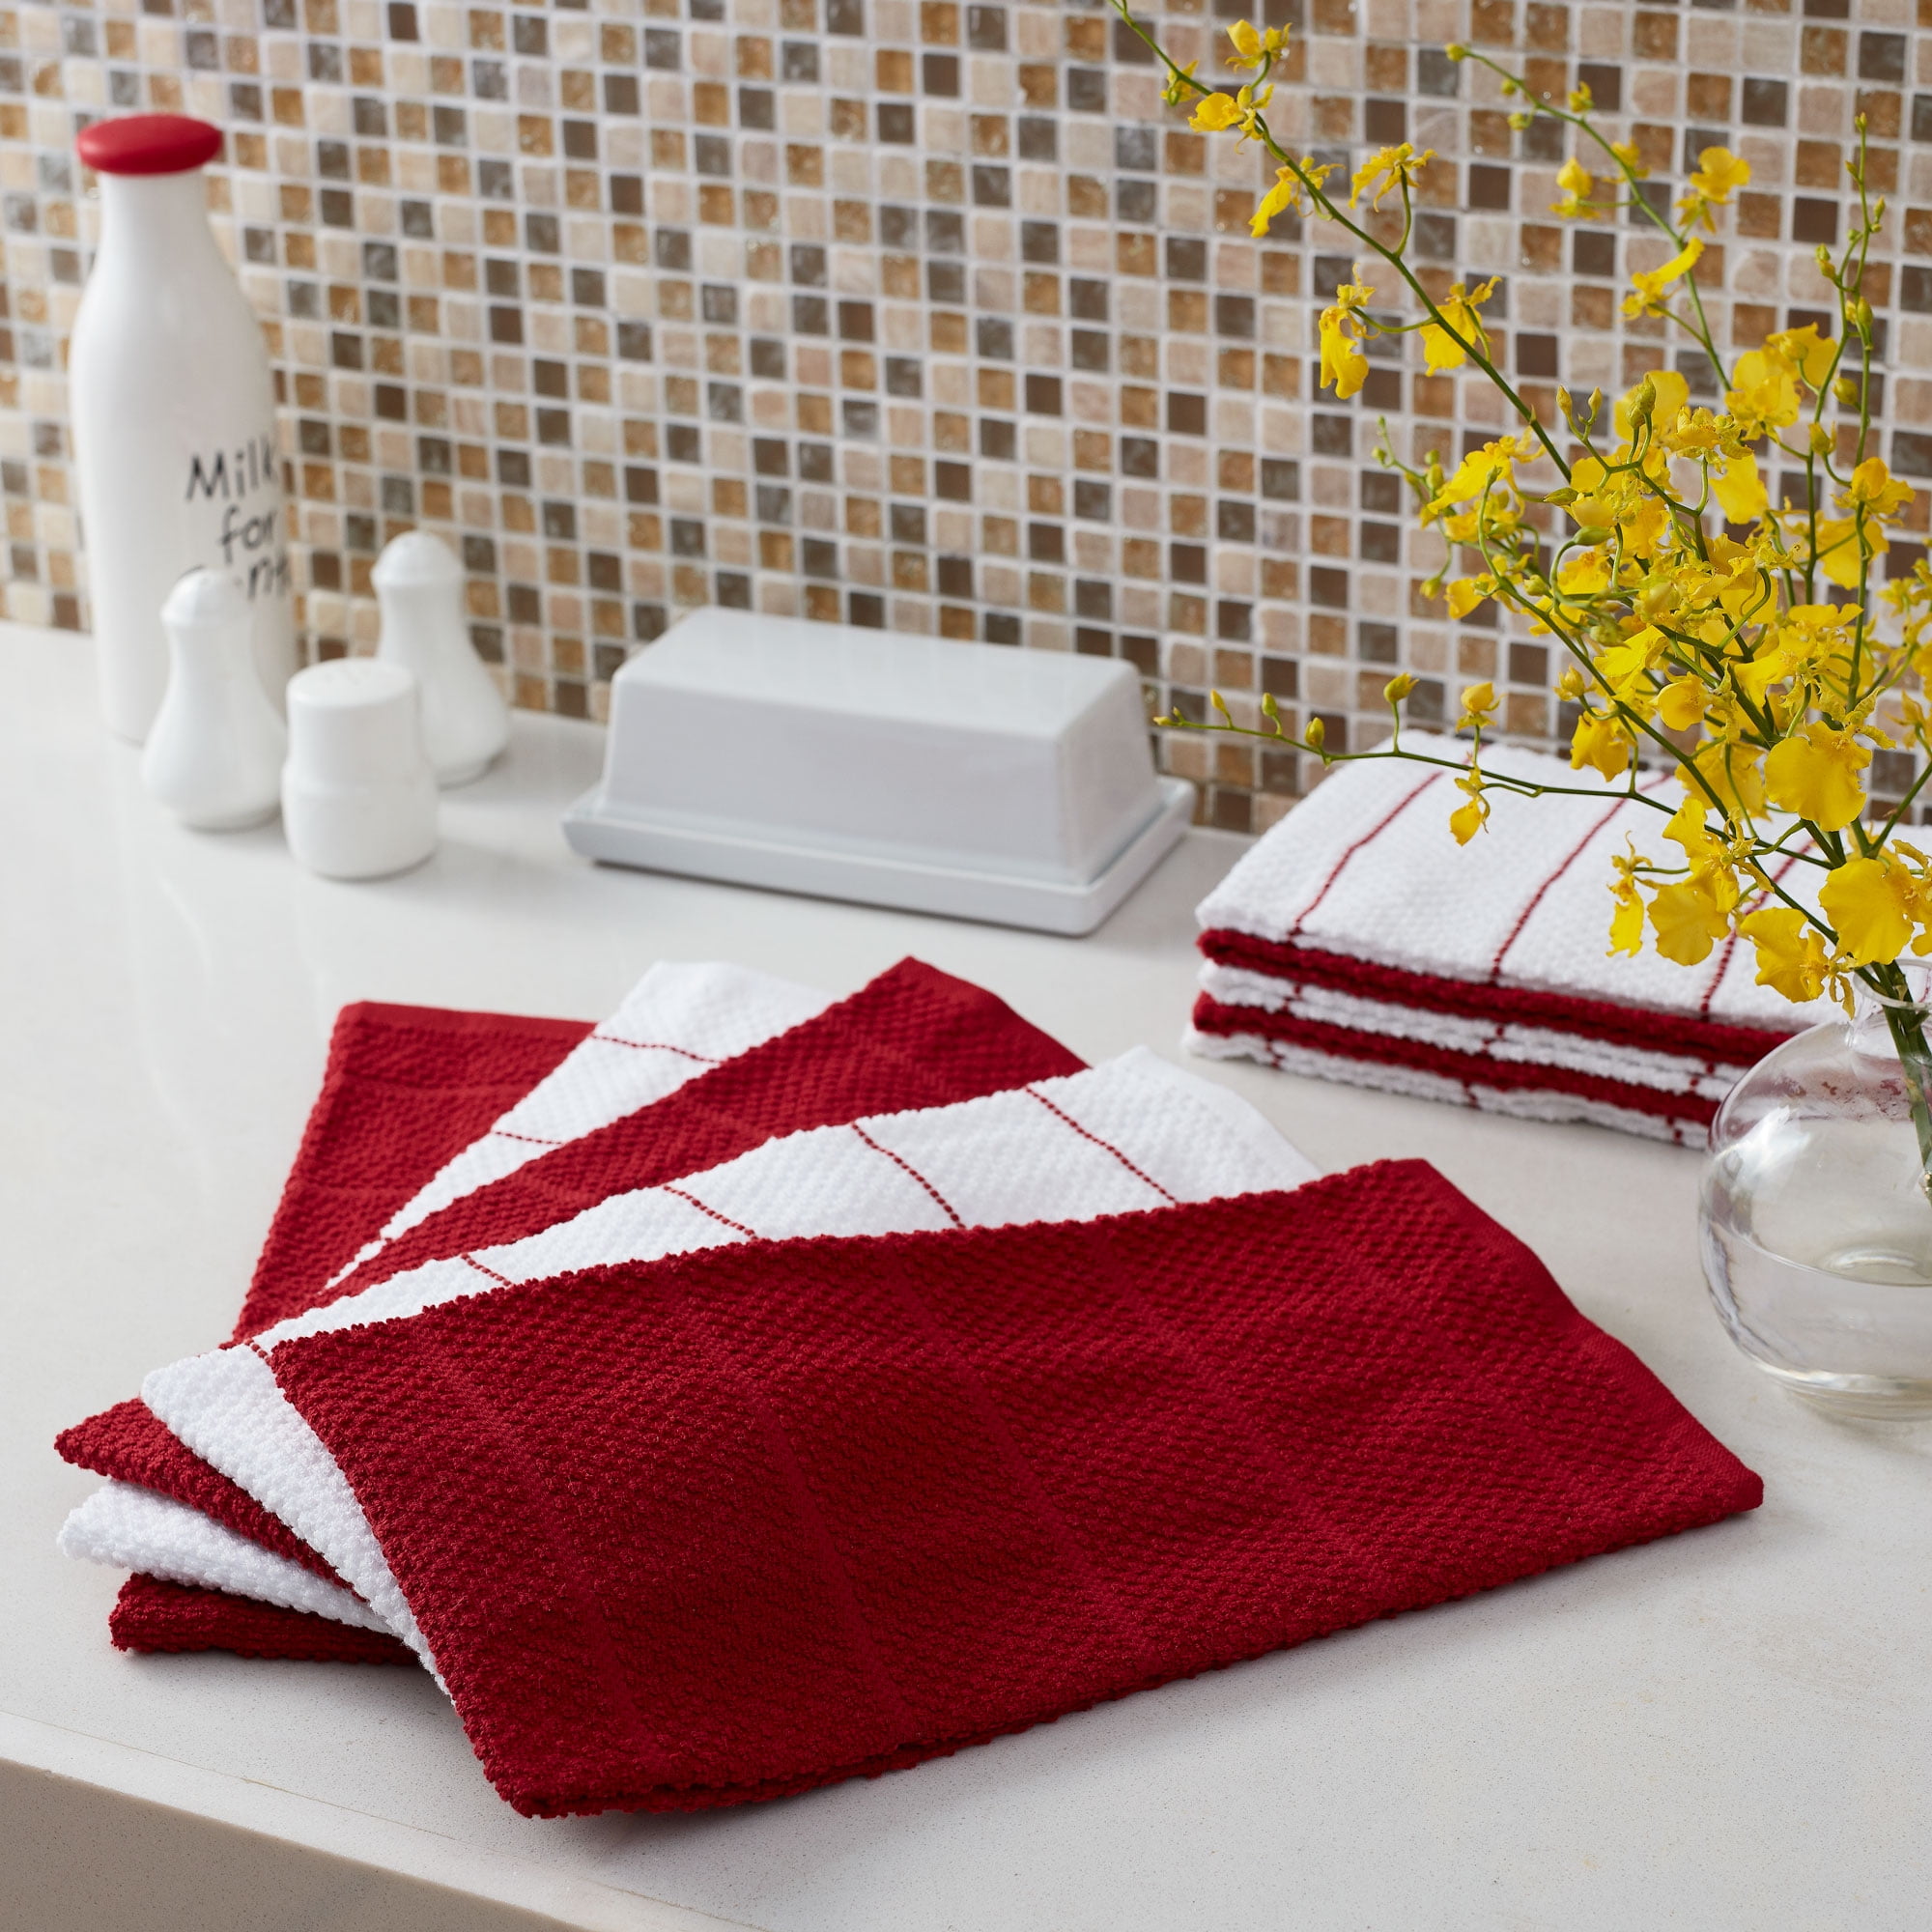 TALVANIA Brown Kitchen Dish Towels 100% Cotton Dobby Weave Terry Towel Set,  12 Pack Absorbent Multipurpose Dish Cloth for Hand and Cleaning 15” X 25”